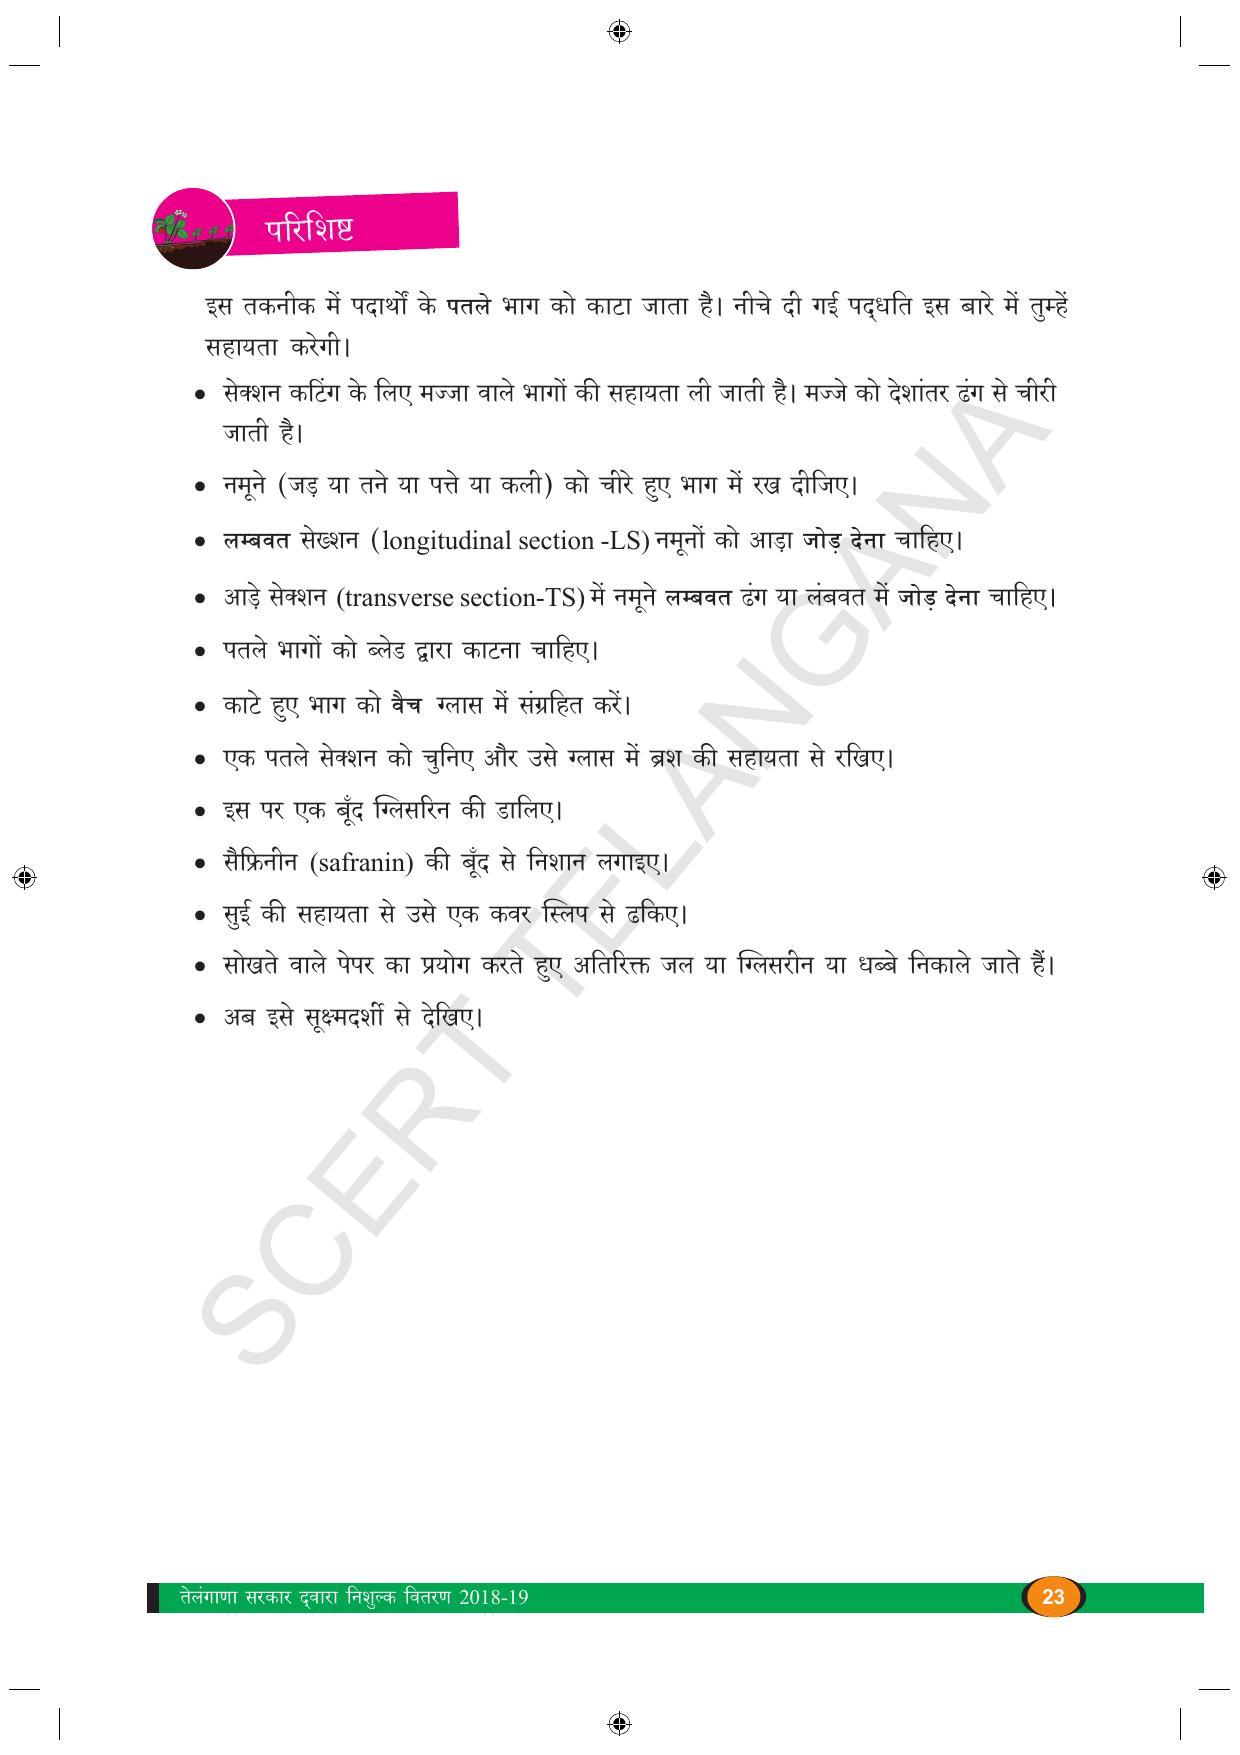 TS SCERT Class 9 Biological Science (Hindi Medium) Text Book - Page 35